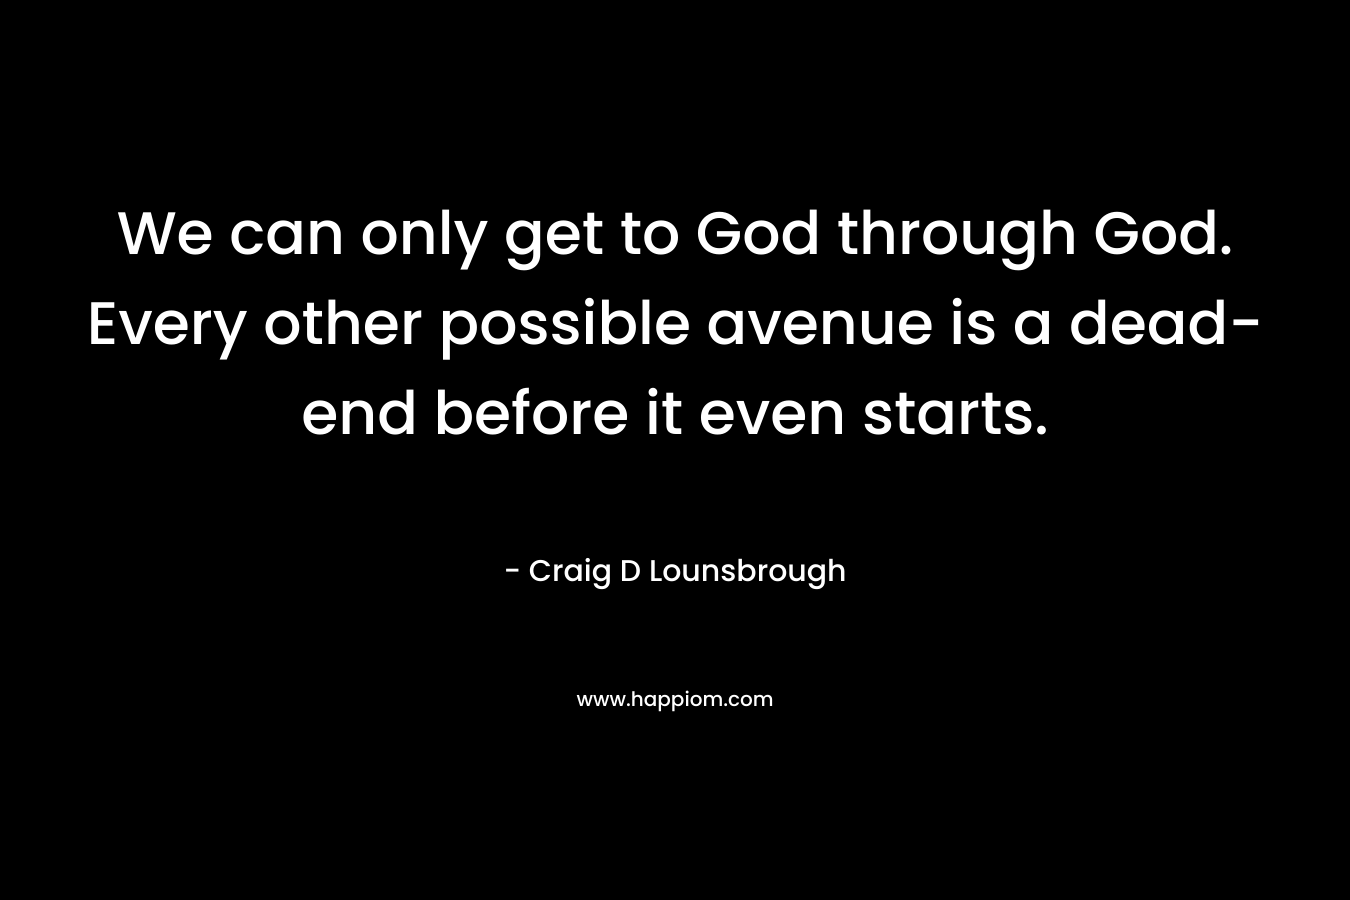 We can only get to God through God. Every other possible avenue is a dead-end before it even starts.